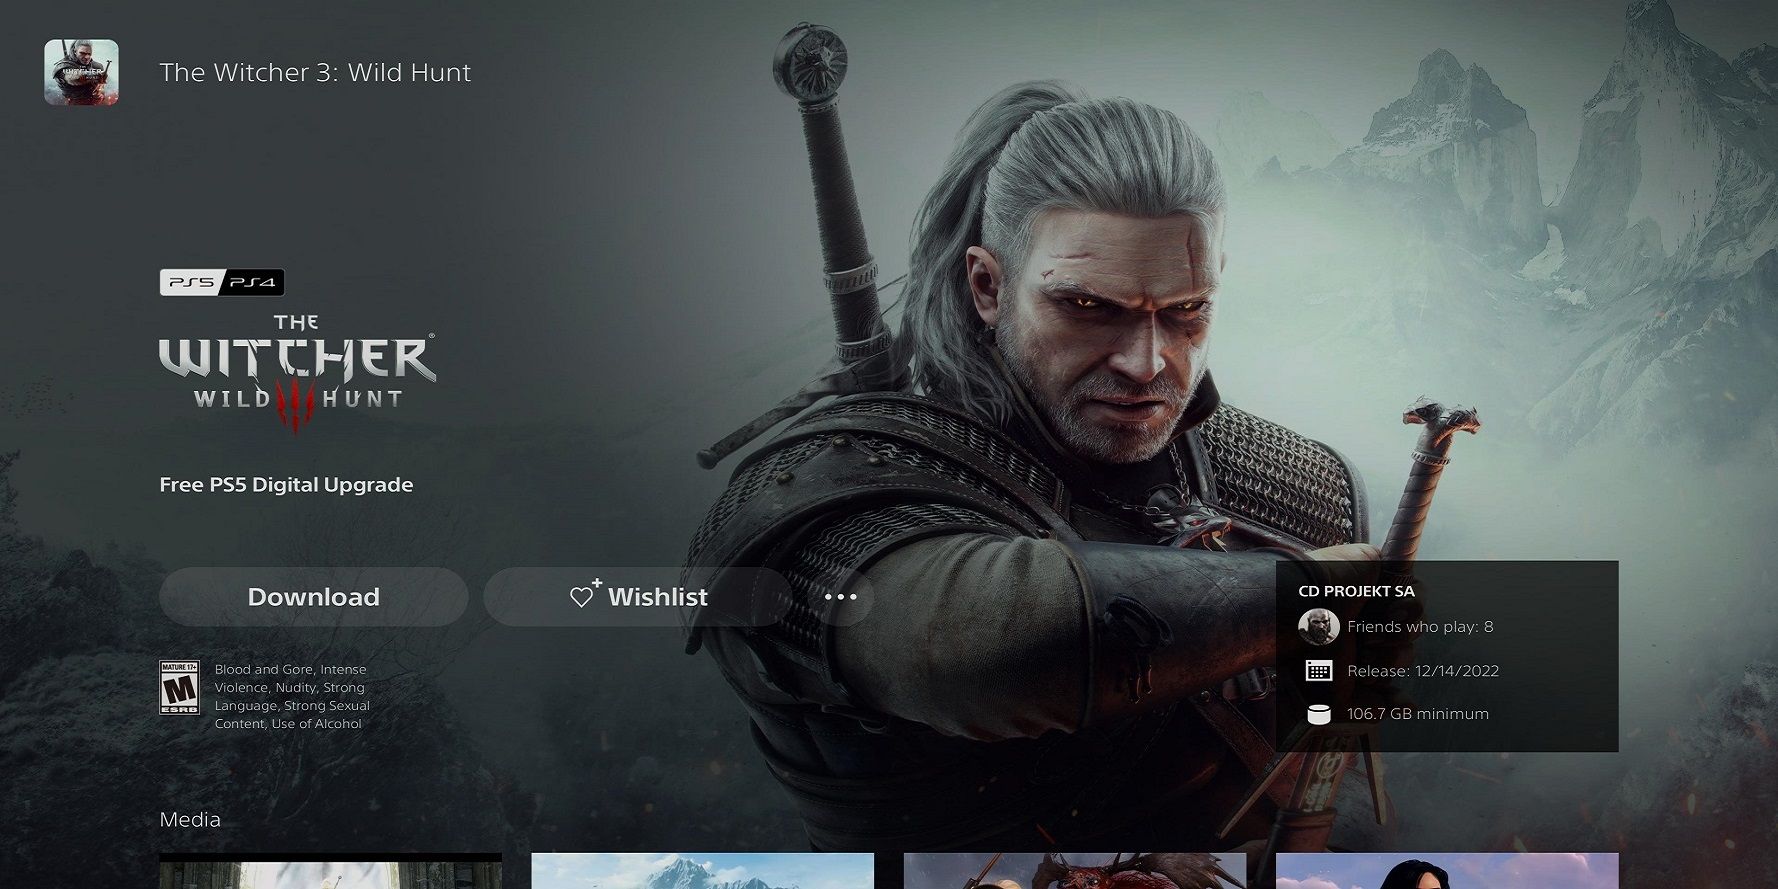 The Witcher 3 PlayStation Store Listing-1